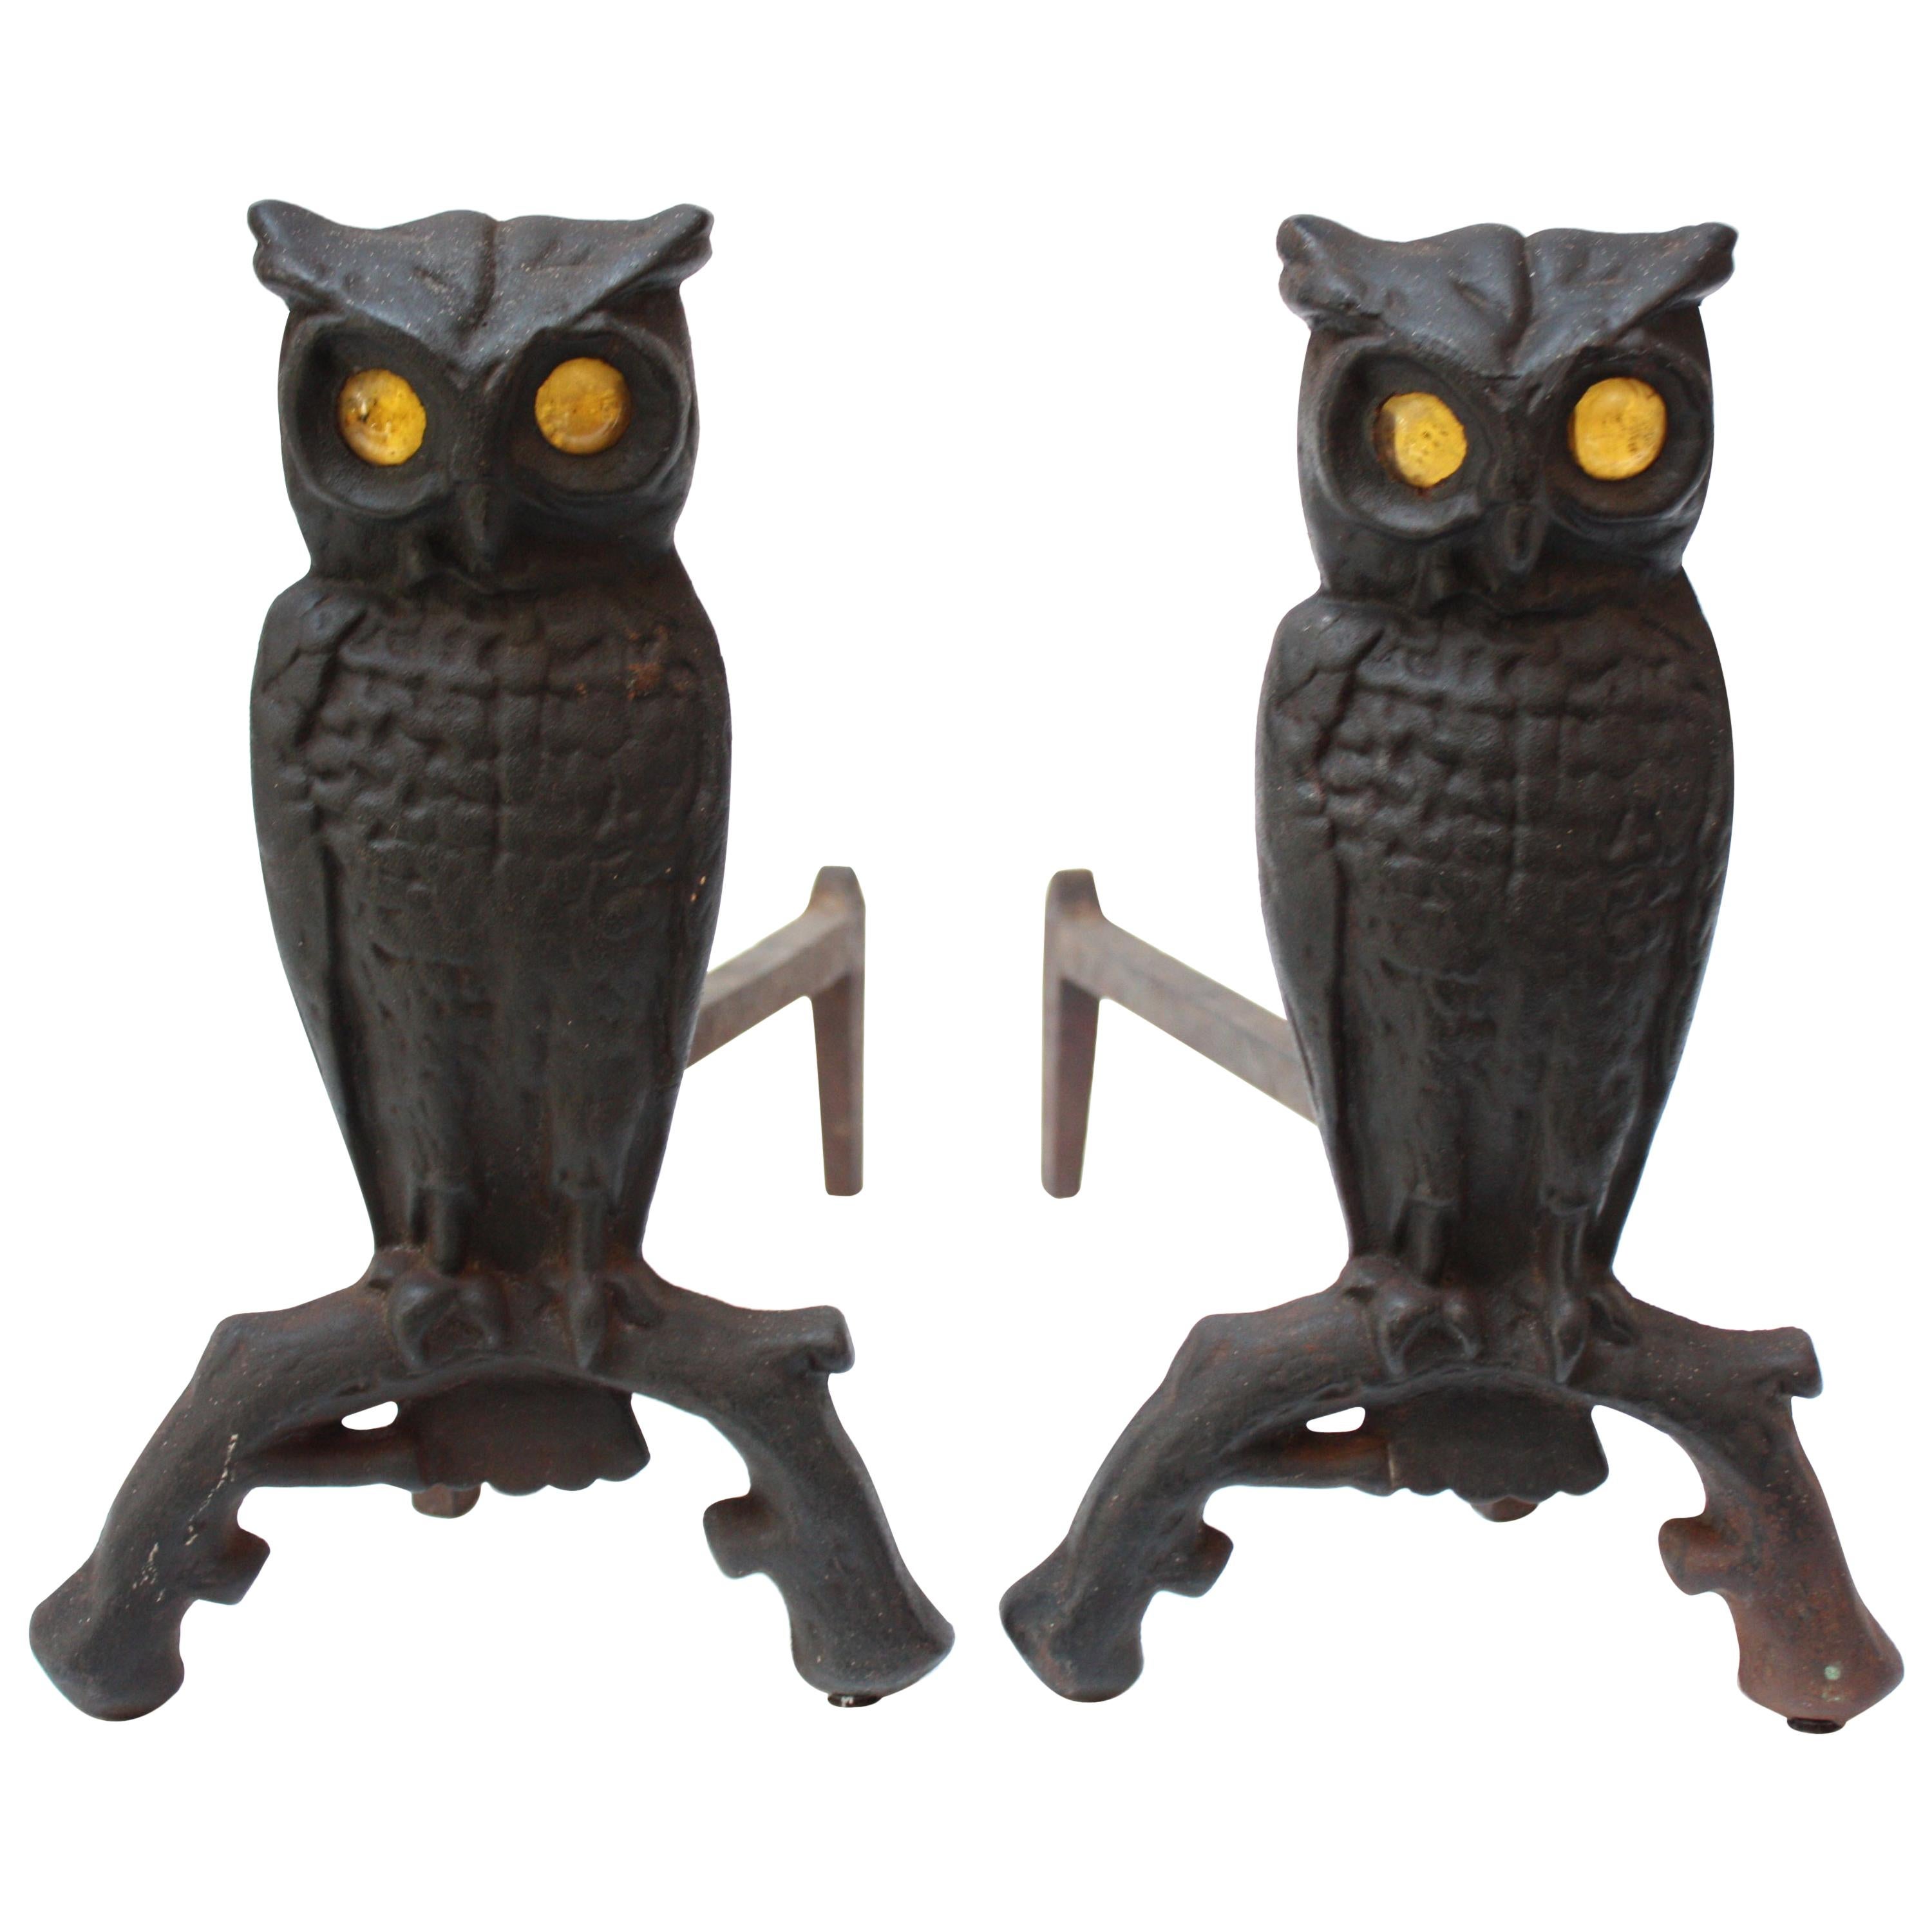 Vintage Cast Iron Owl Andirons with Amber Glass Eyes